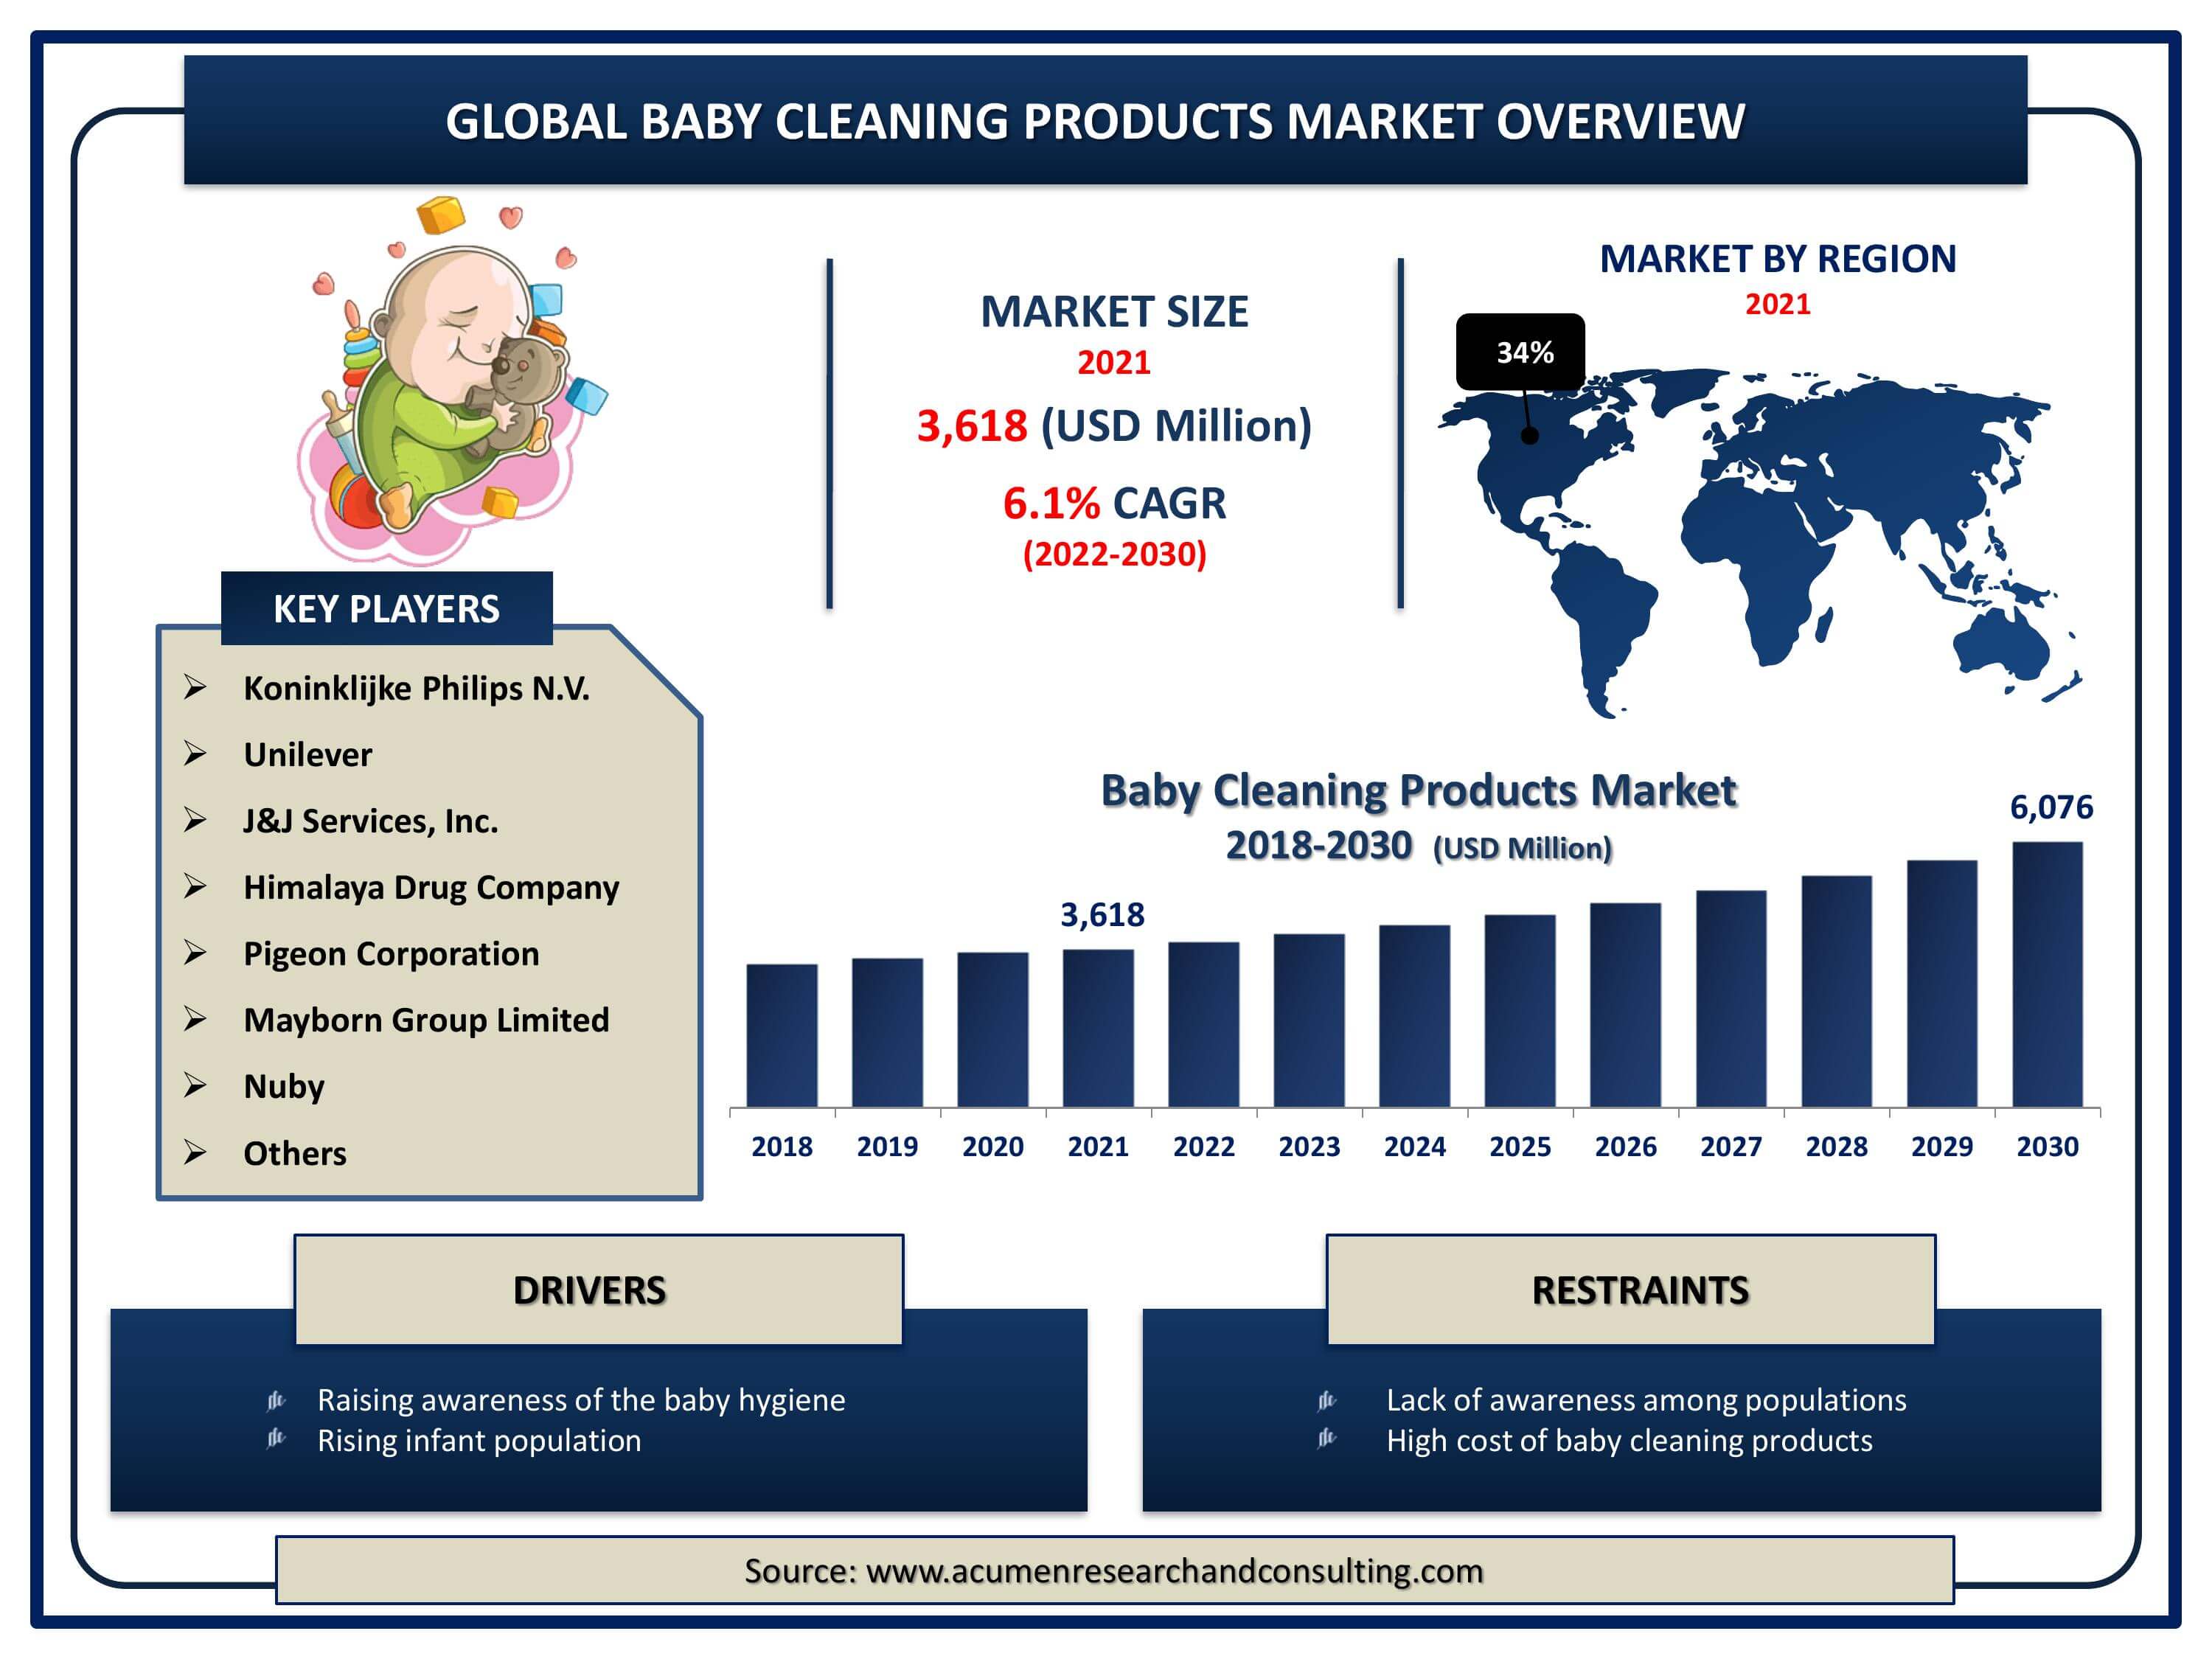 Global baby cleaning products market revenue is estimated to expand by USD 6,076 million by 2030, with a 6.1% CAGR from 2022 to 2030.